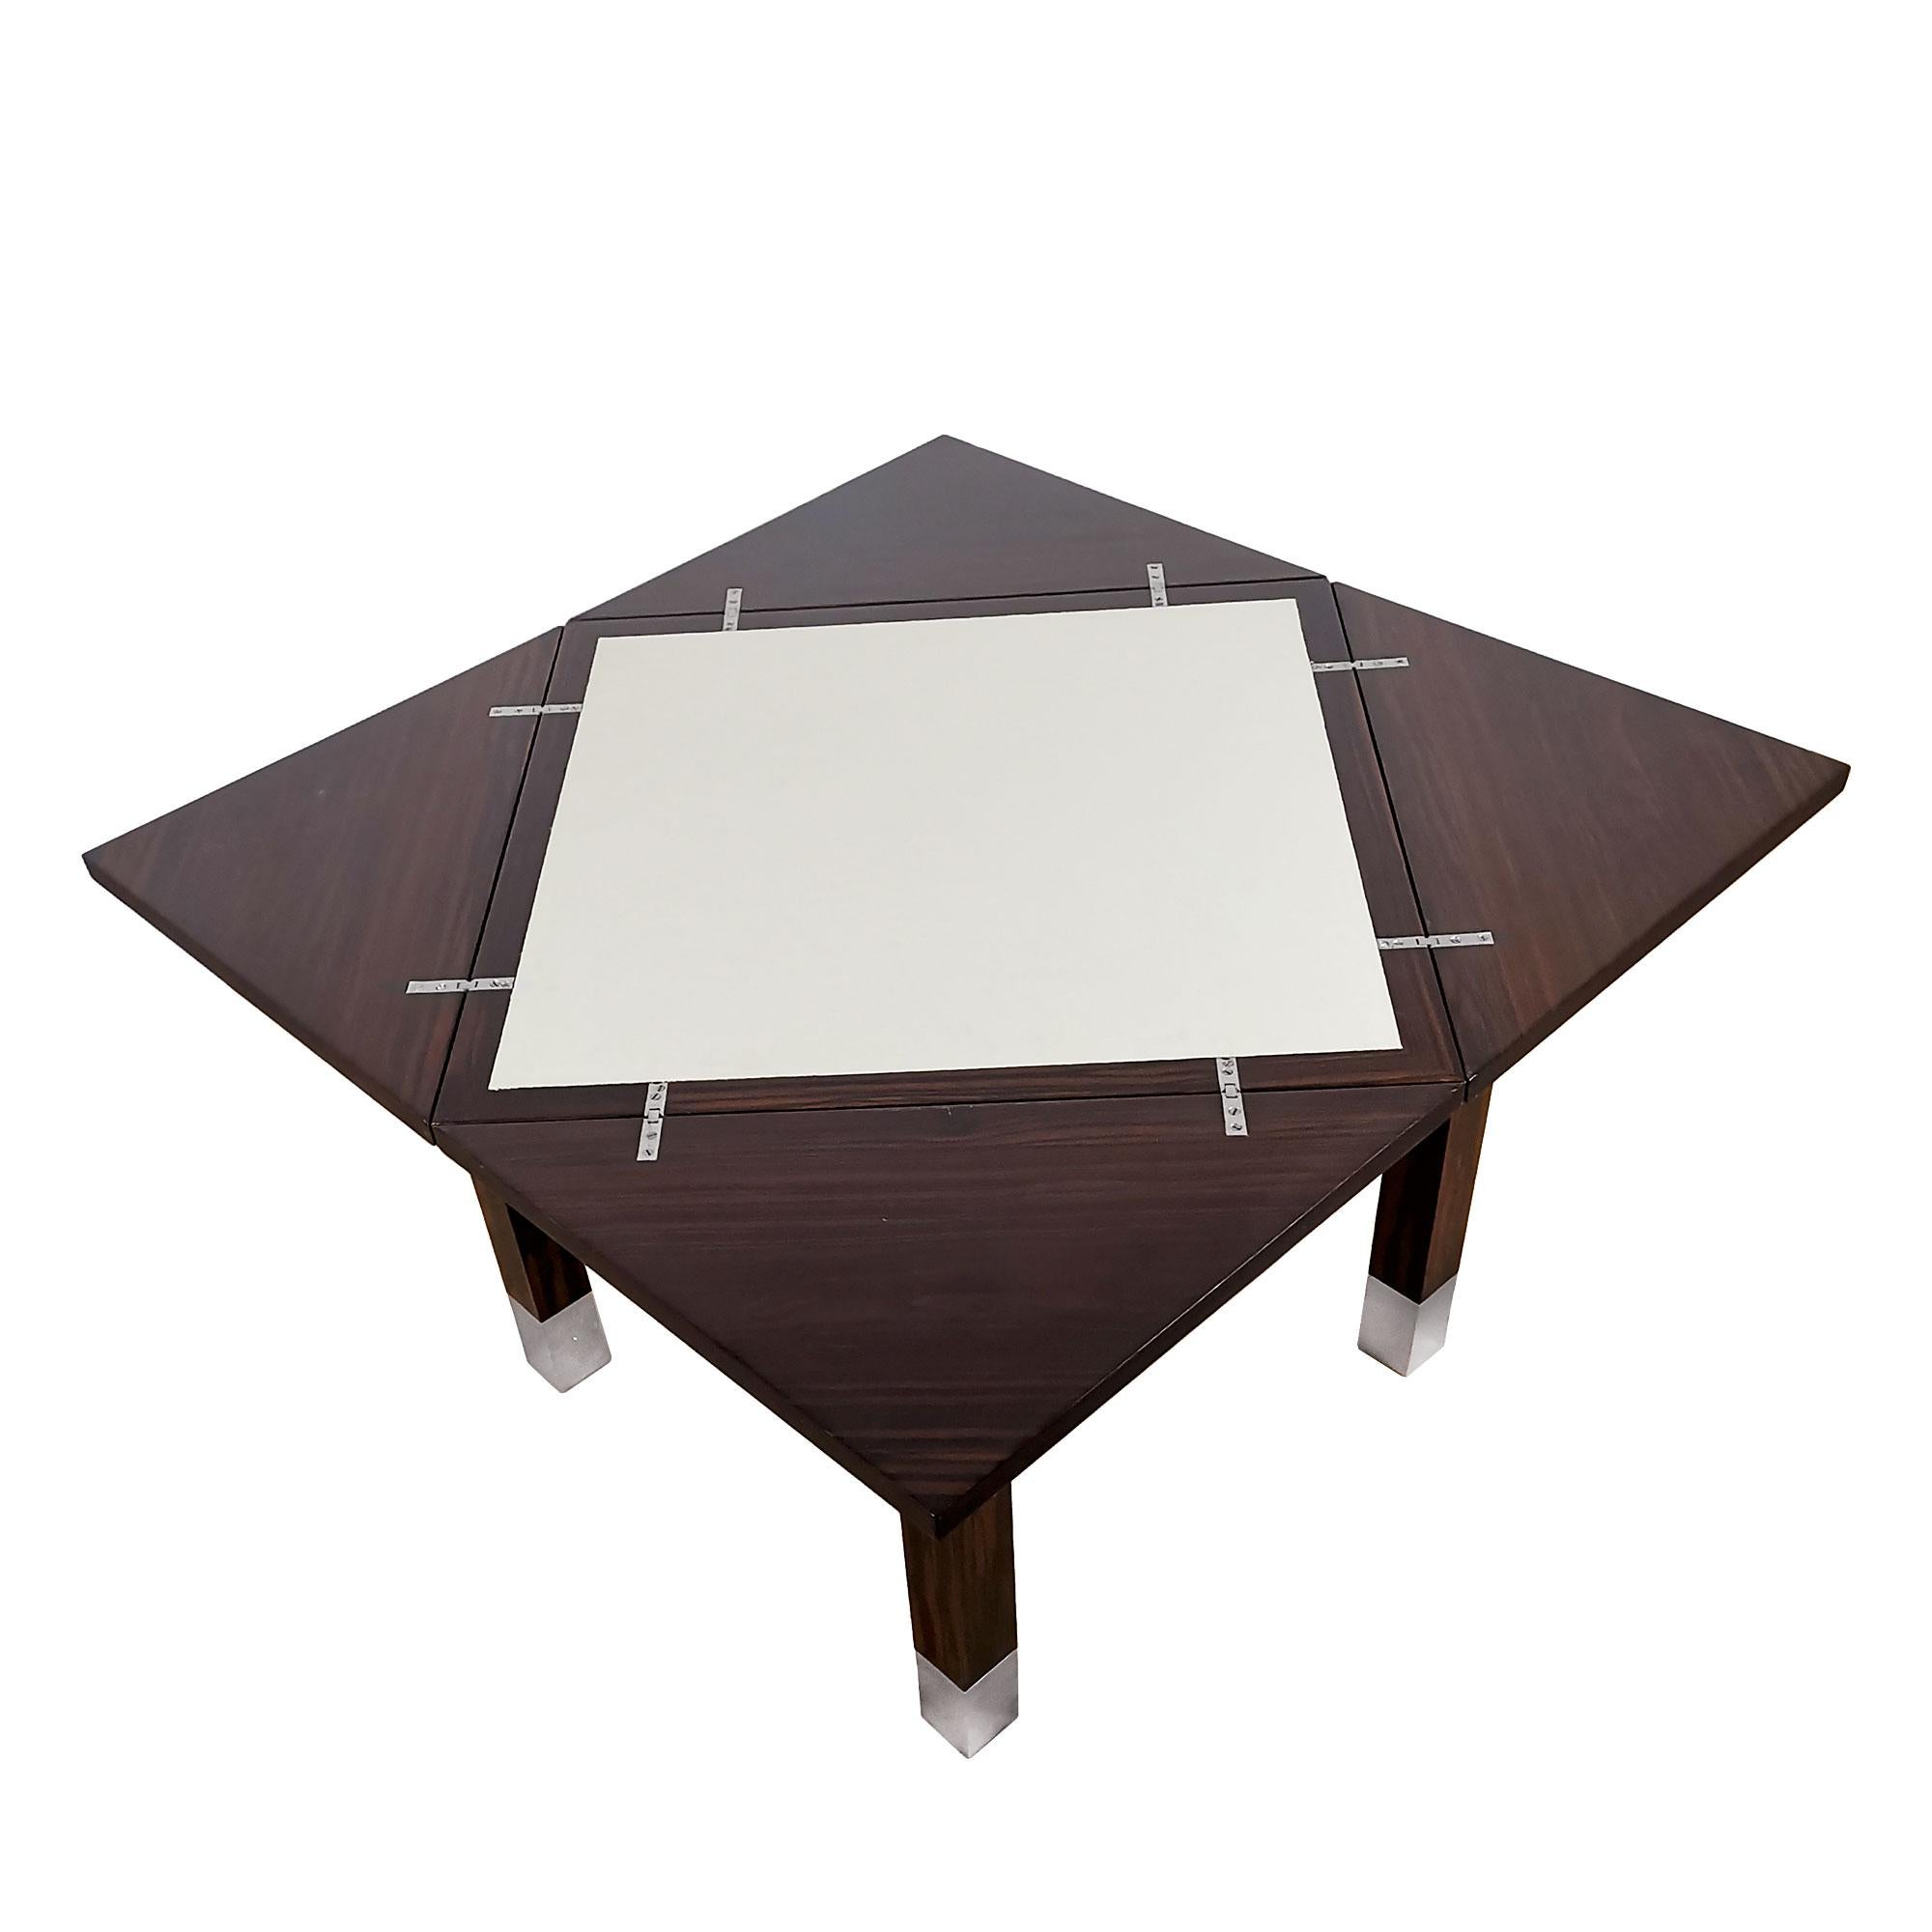 1930s Art Deco Folding Game Table in Oak, Macassar Ebony and Brass - France For Sale 2